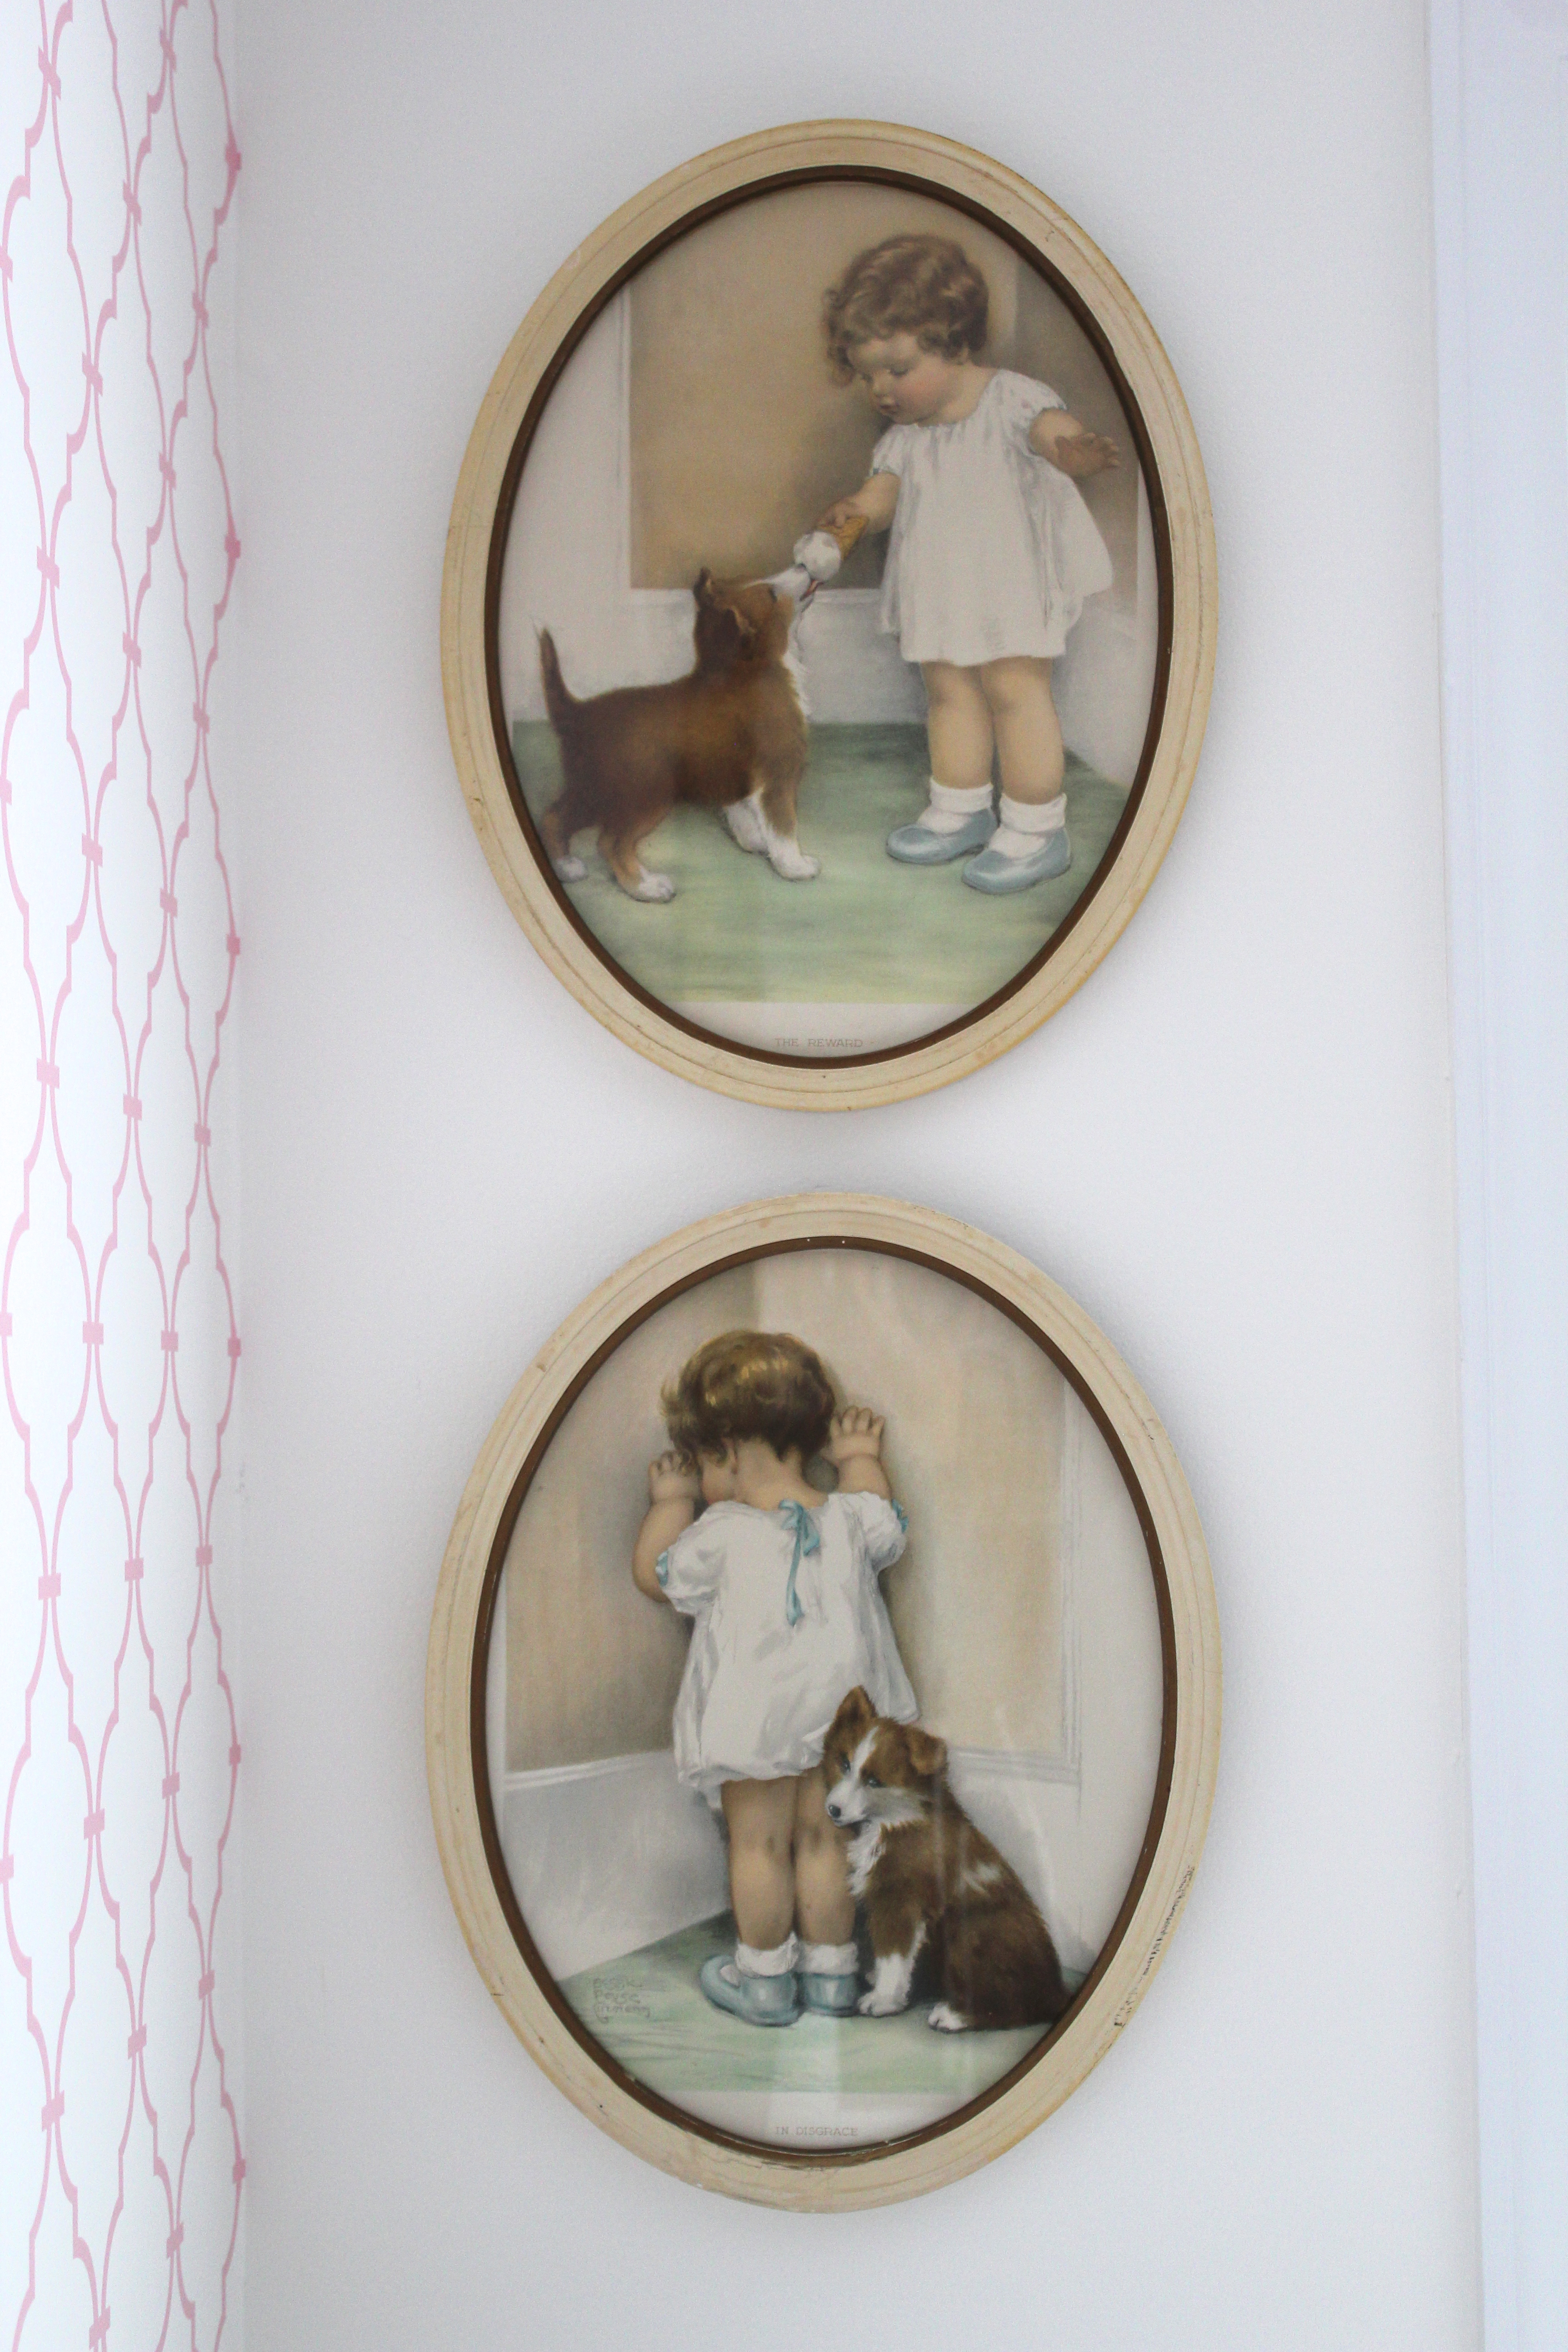 Antique Prints of a Little Girl and her Dog